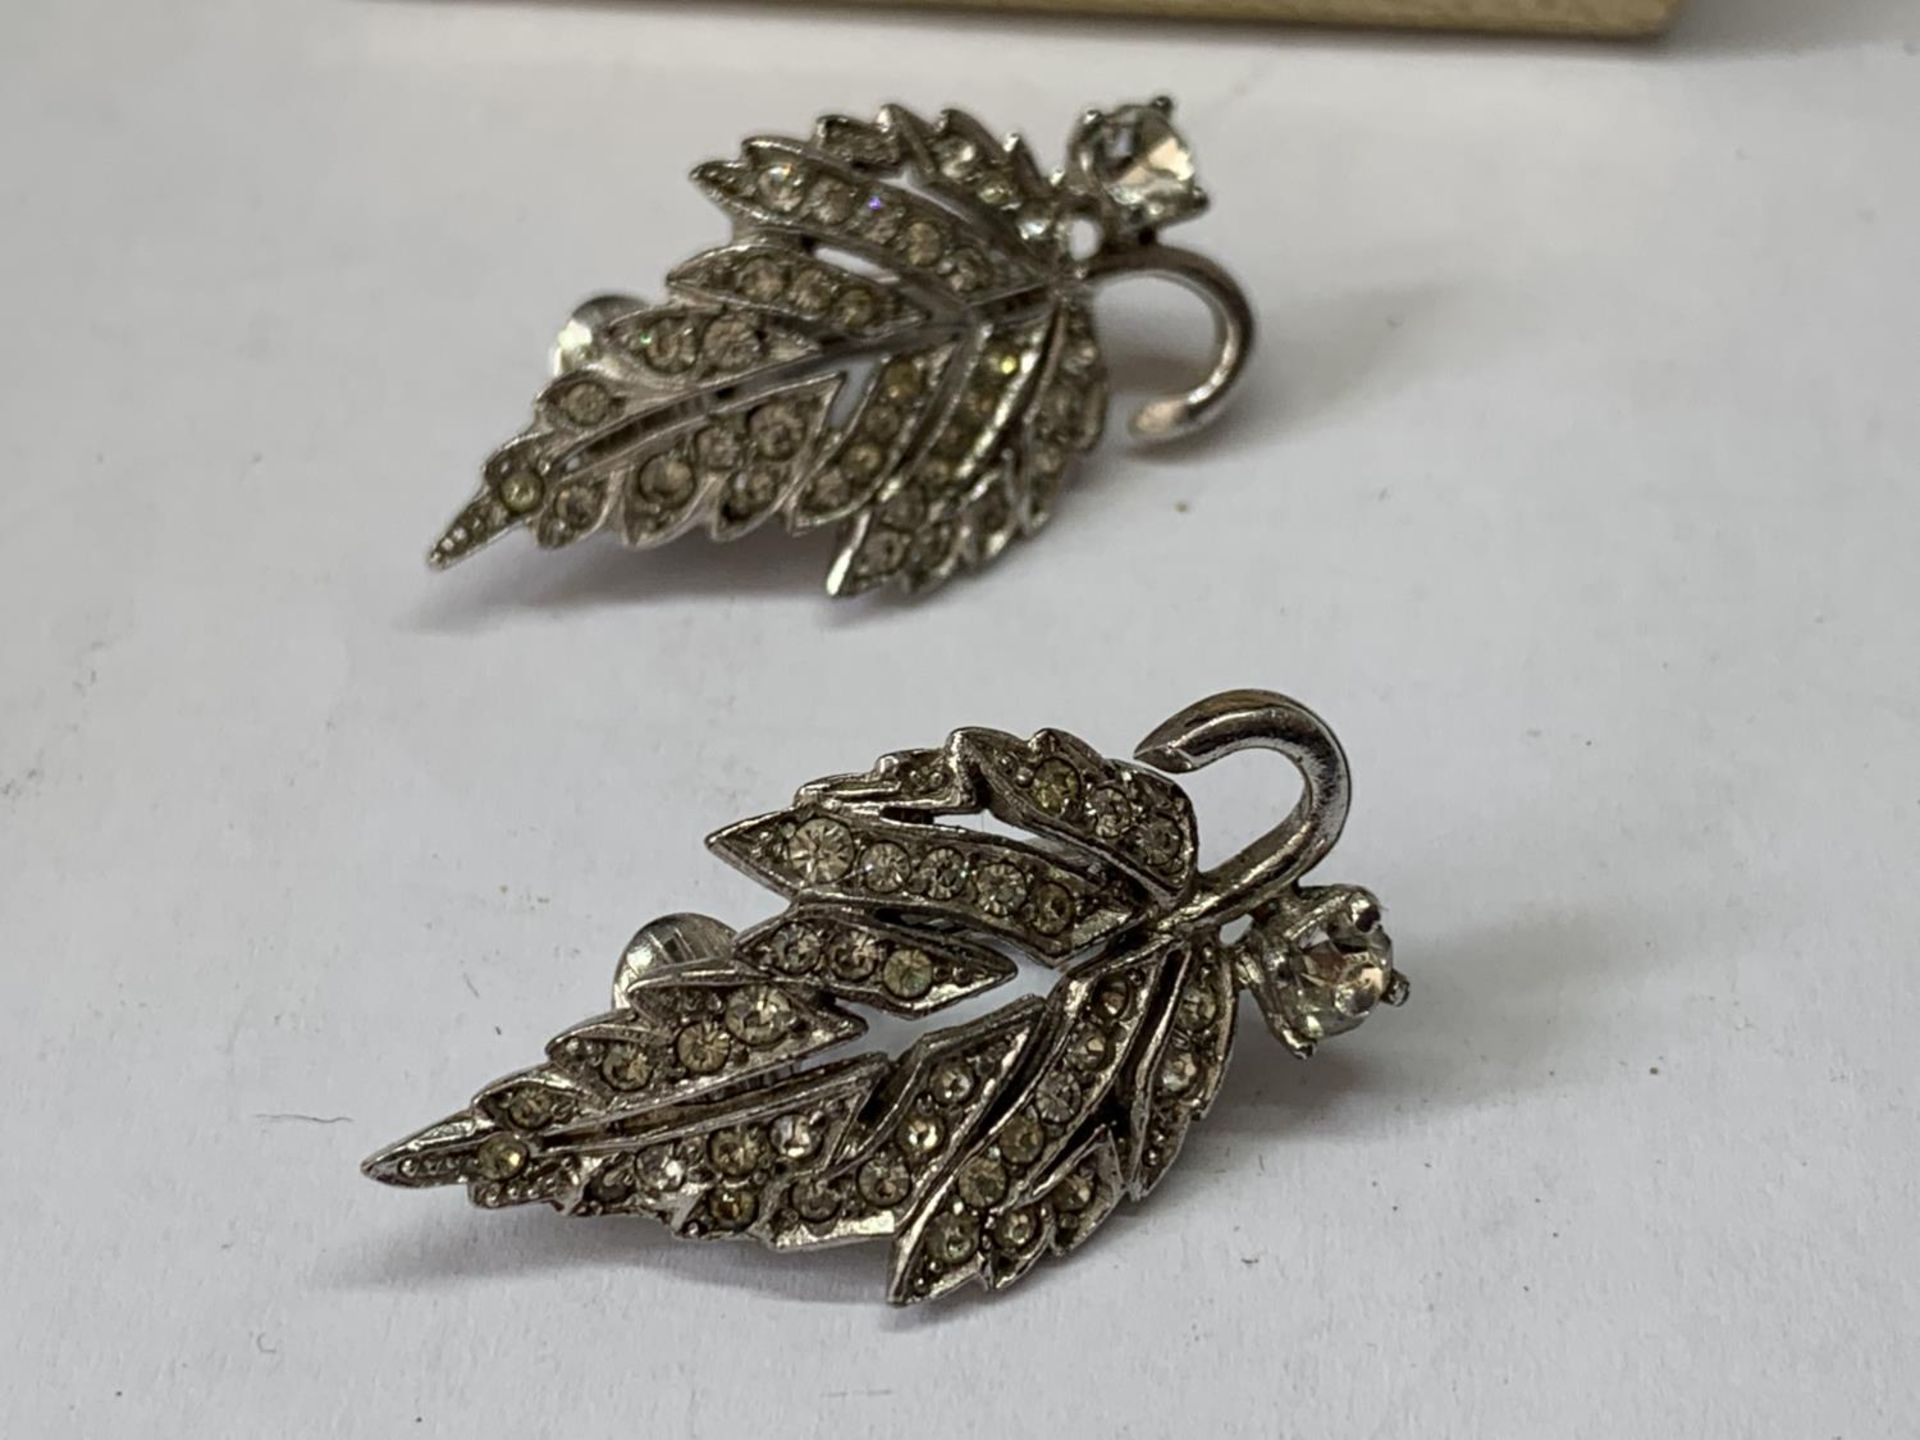 A PAIR OF 1940'S METAL RHODIUM AND CLEAR STONE EARRINGS IN A LEAF DESIGN WITH PRESENTATION BOX - Image 2 of 3